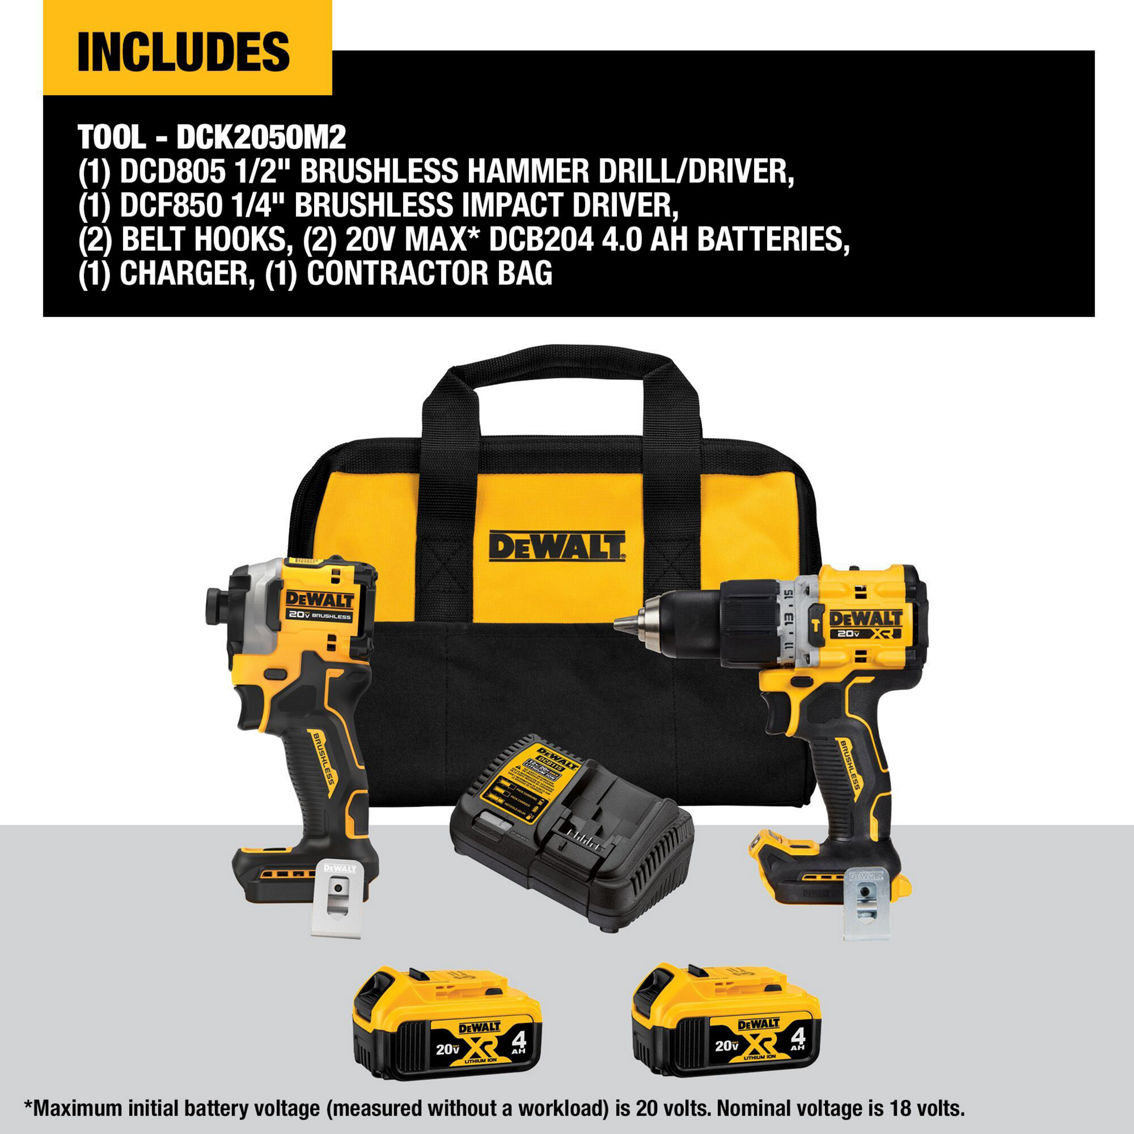 DeWalt 20V MAX* XR Li-Ion Brushless Compact Hammerdrill and Impact Driver Kit - Image 2 of 3